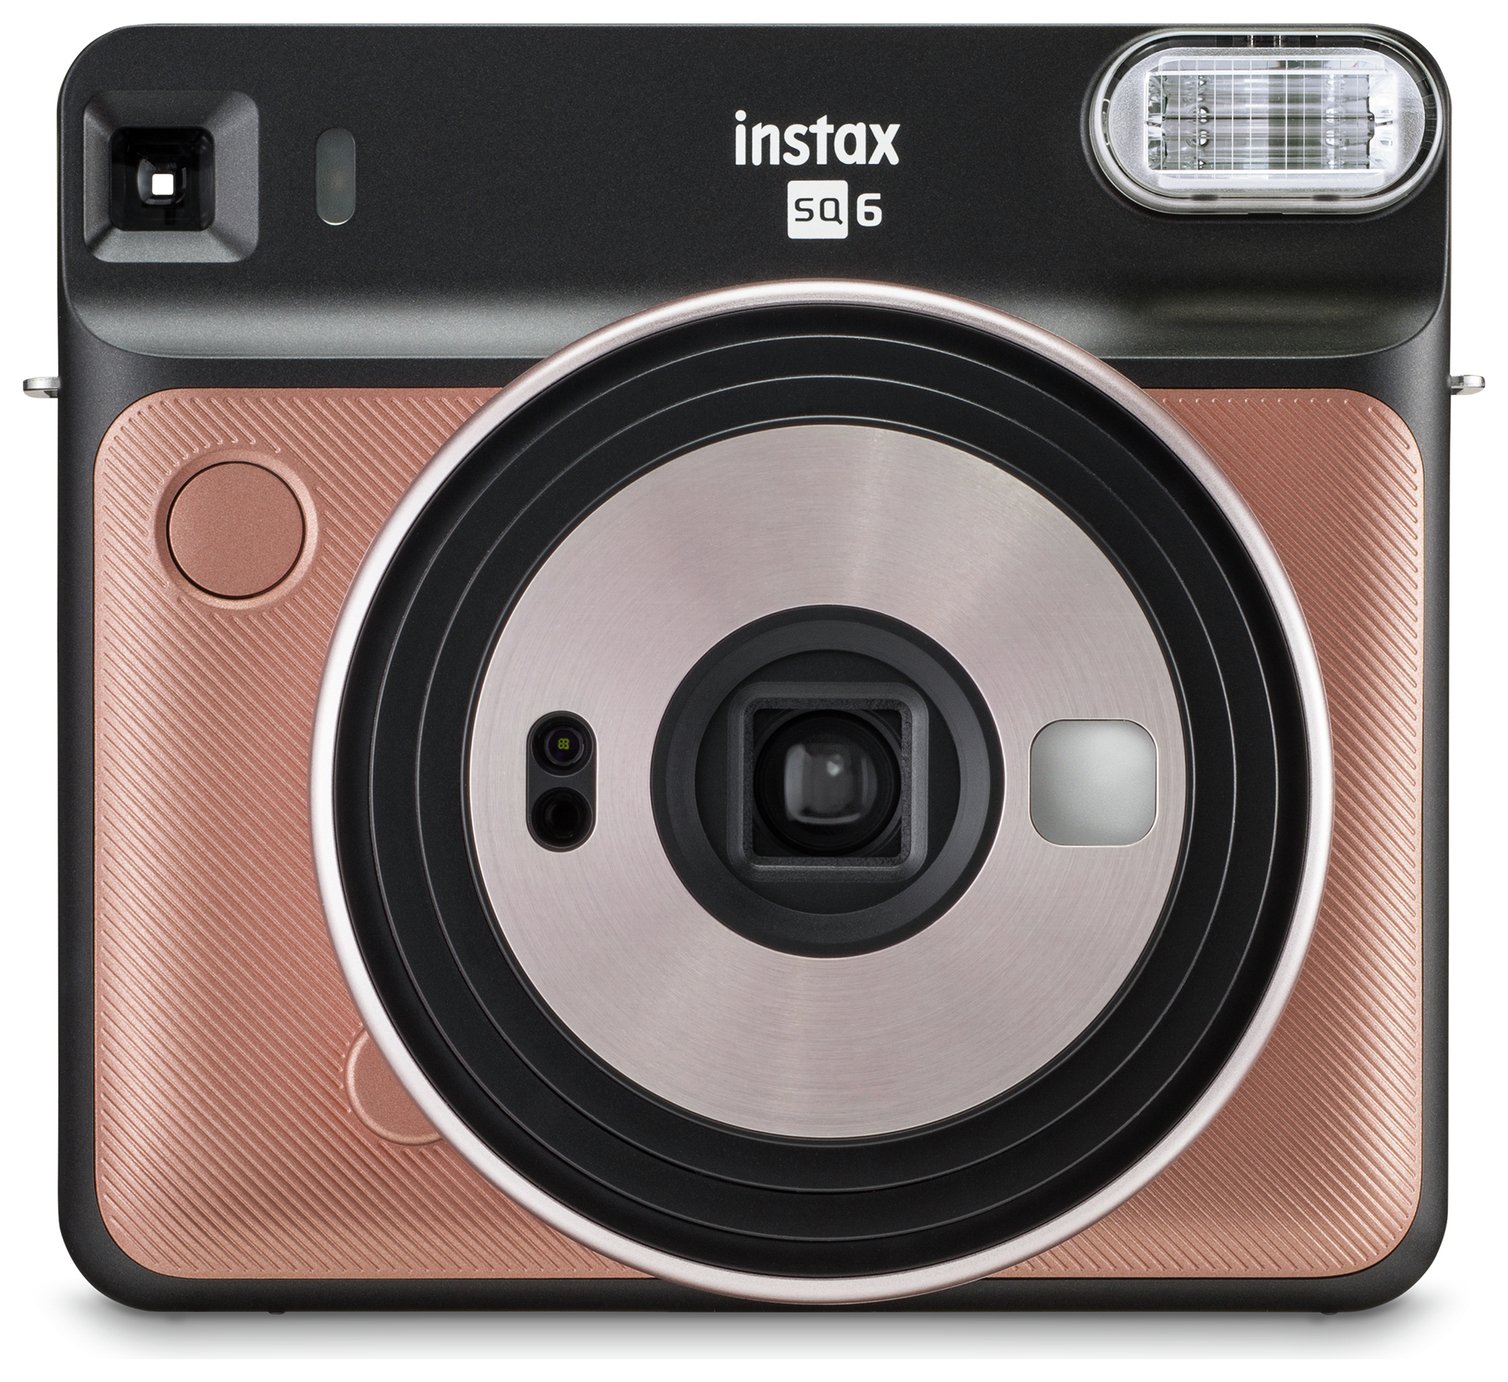 instax SQ 6 Instant Camera Review